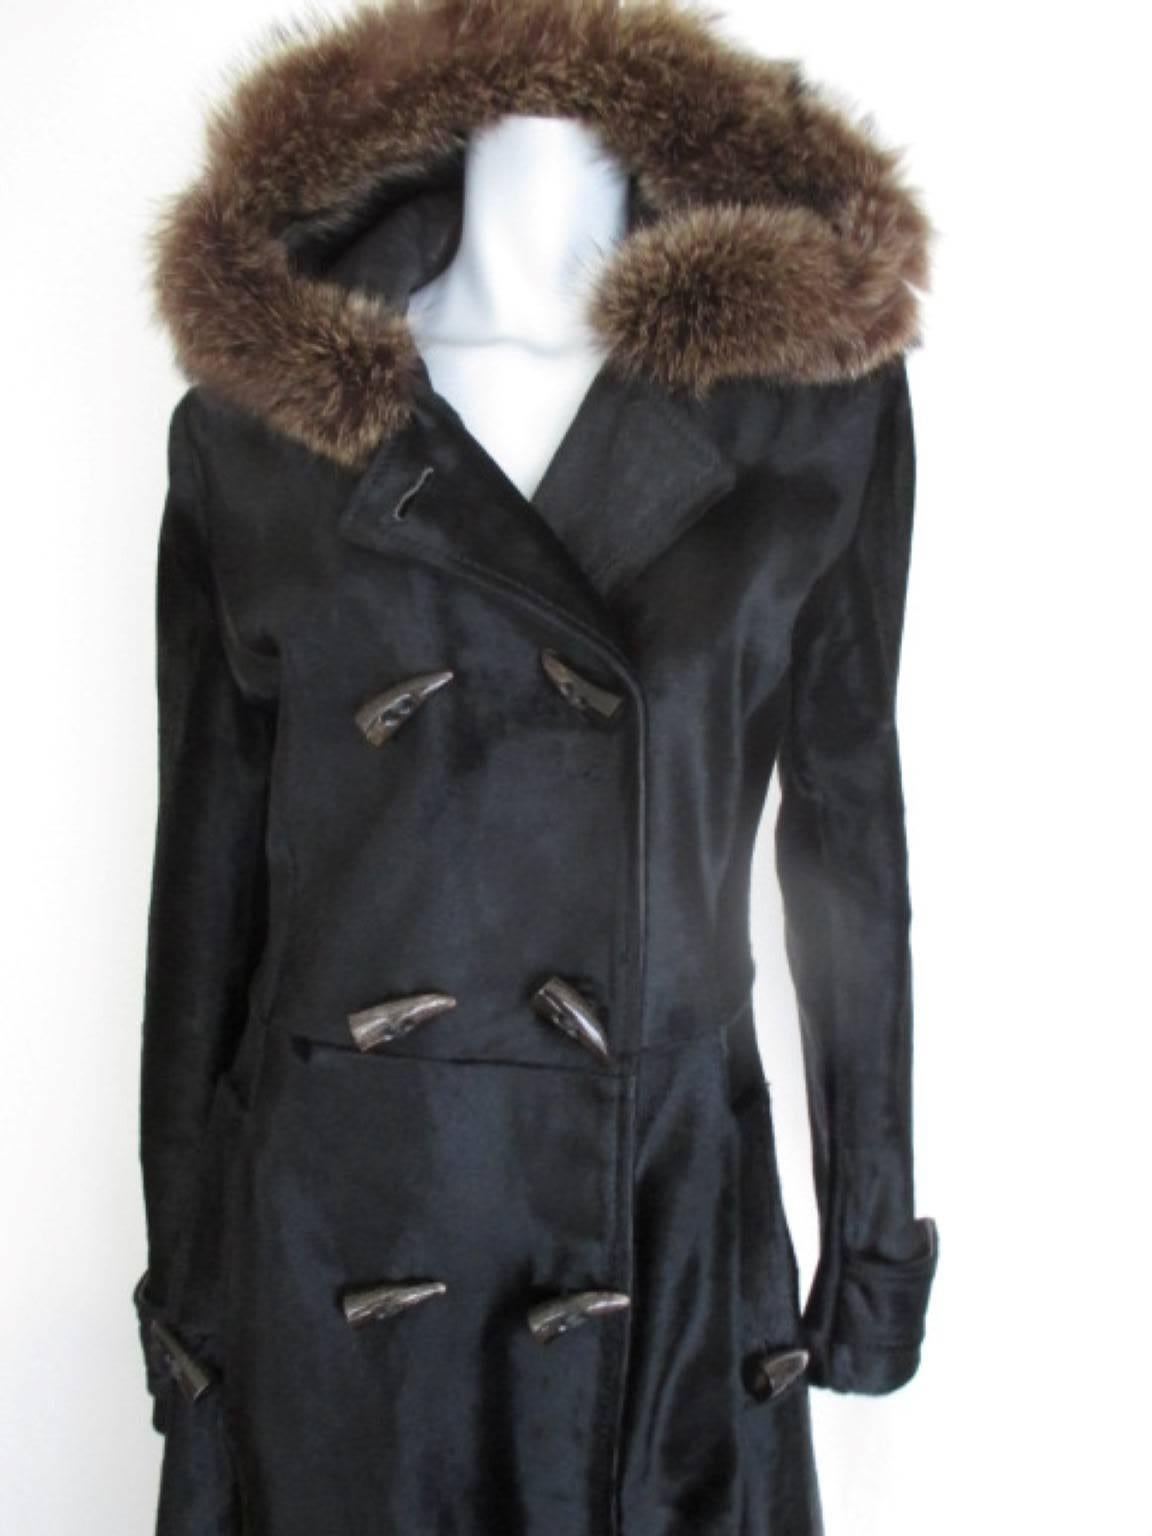 This coat is made of quality skin with a hood lined with soft calf skin leather and fur.

View our frontstore for more exclusive fur items

Details:
It has 2 pockets and double brested with 8 buttons at front, 2 at the pockets and 2 at the